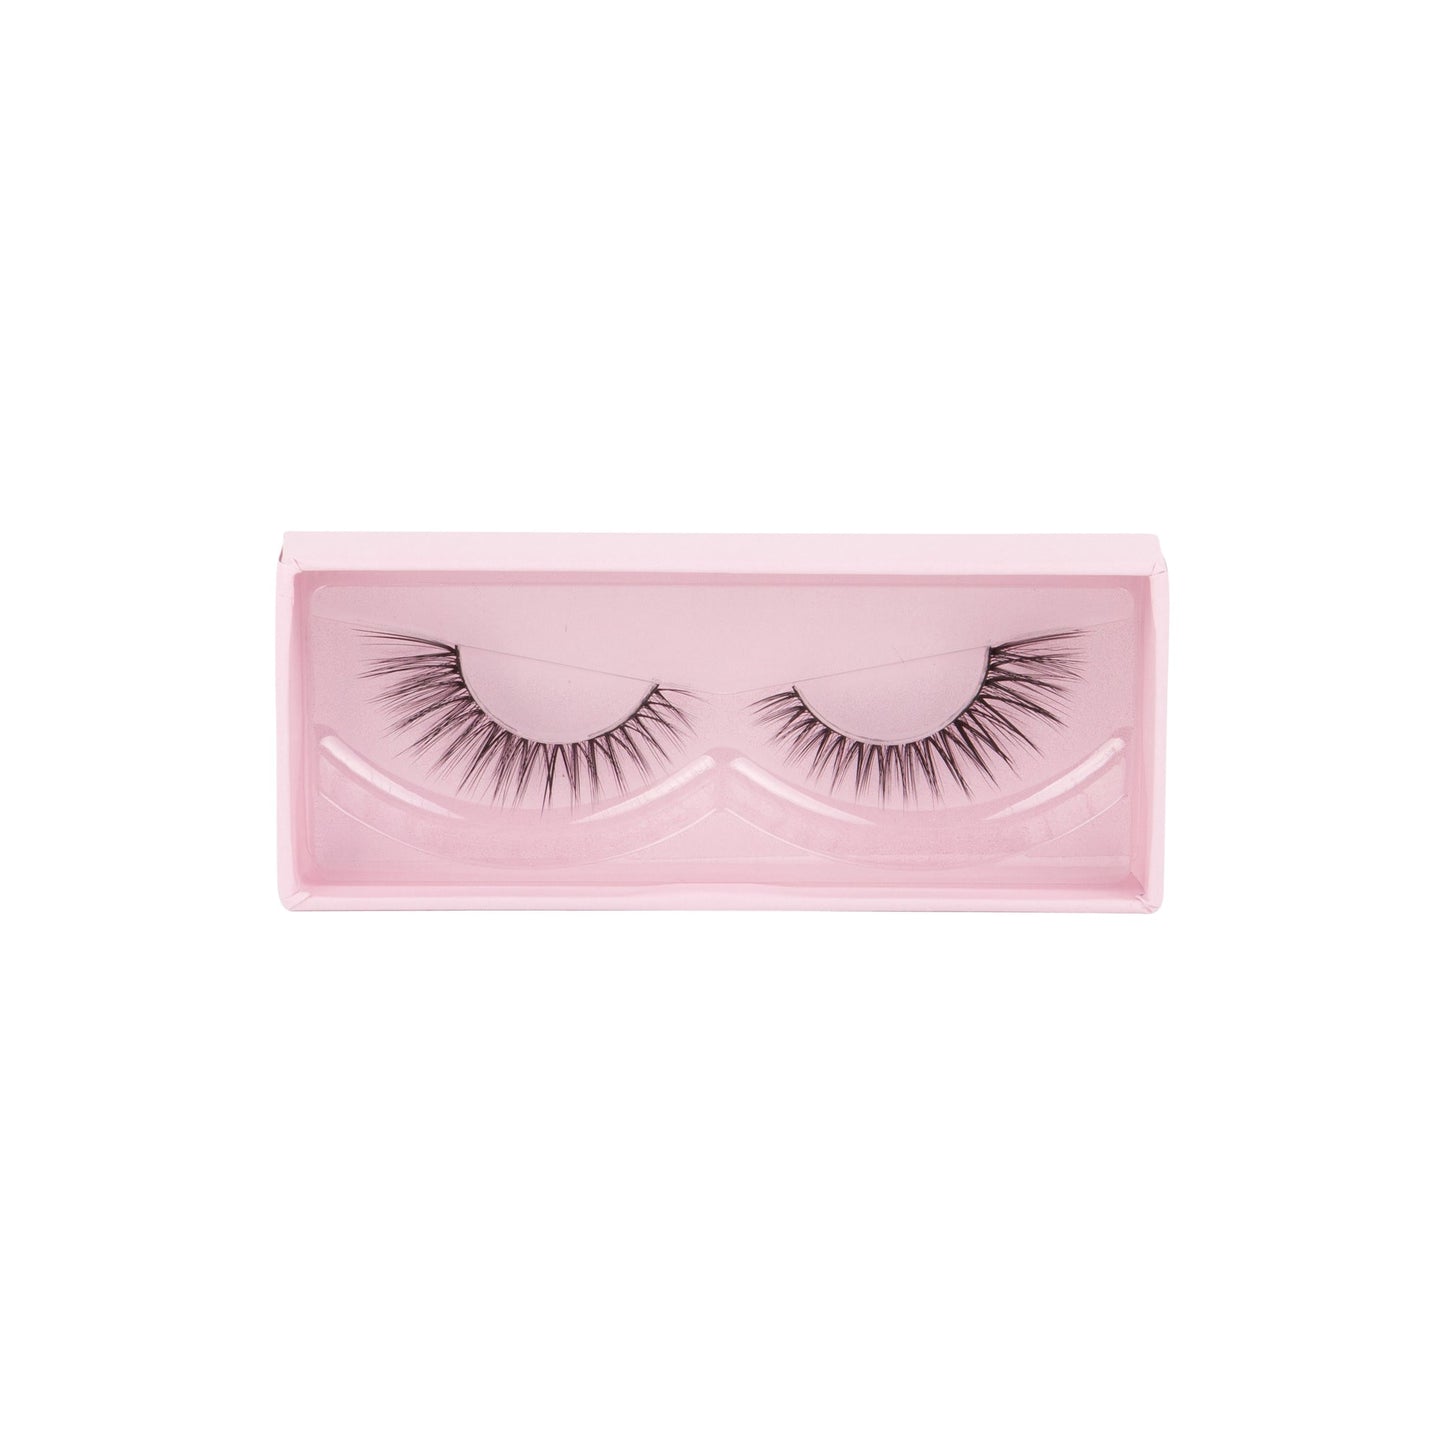 Too Much Ego - 3D Silk Lashes